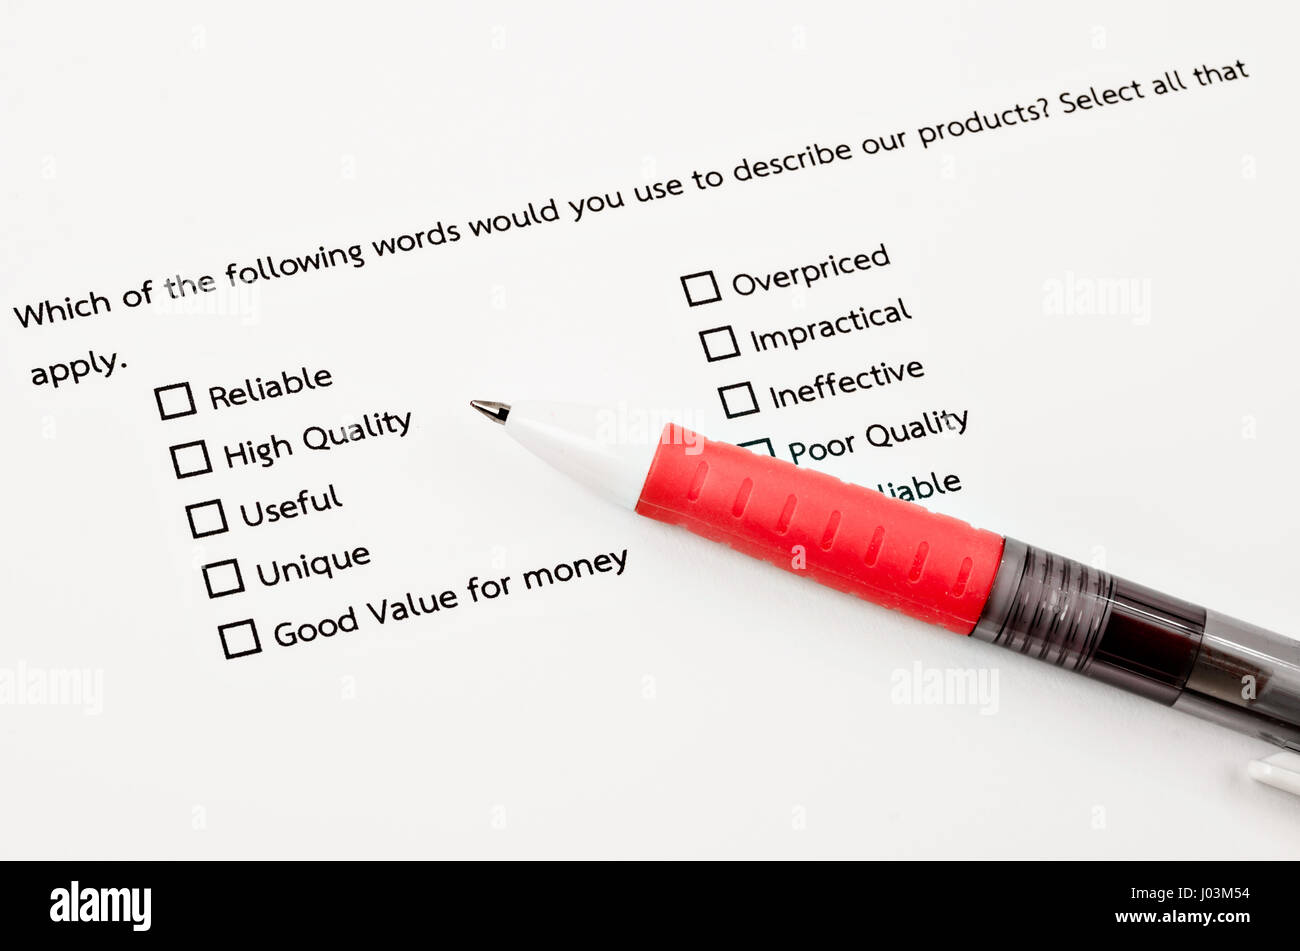 Which of the following words would you use to describe our product survey with pen. Stock Photo